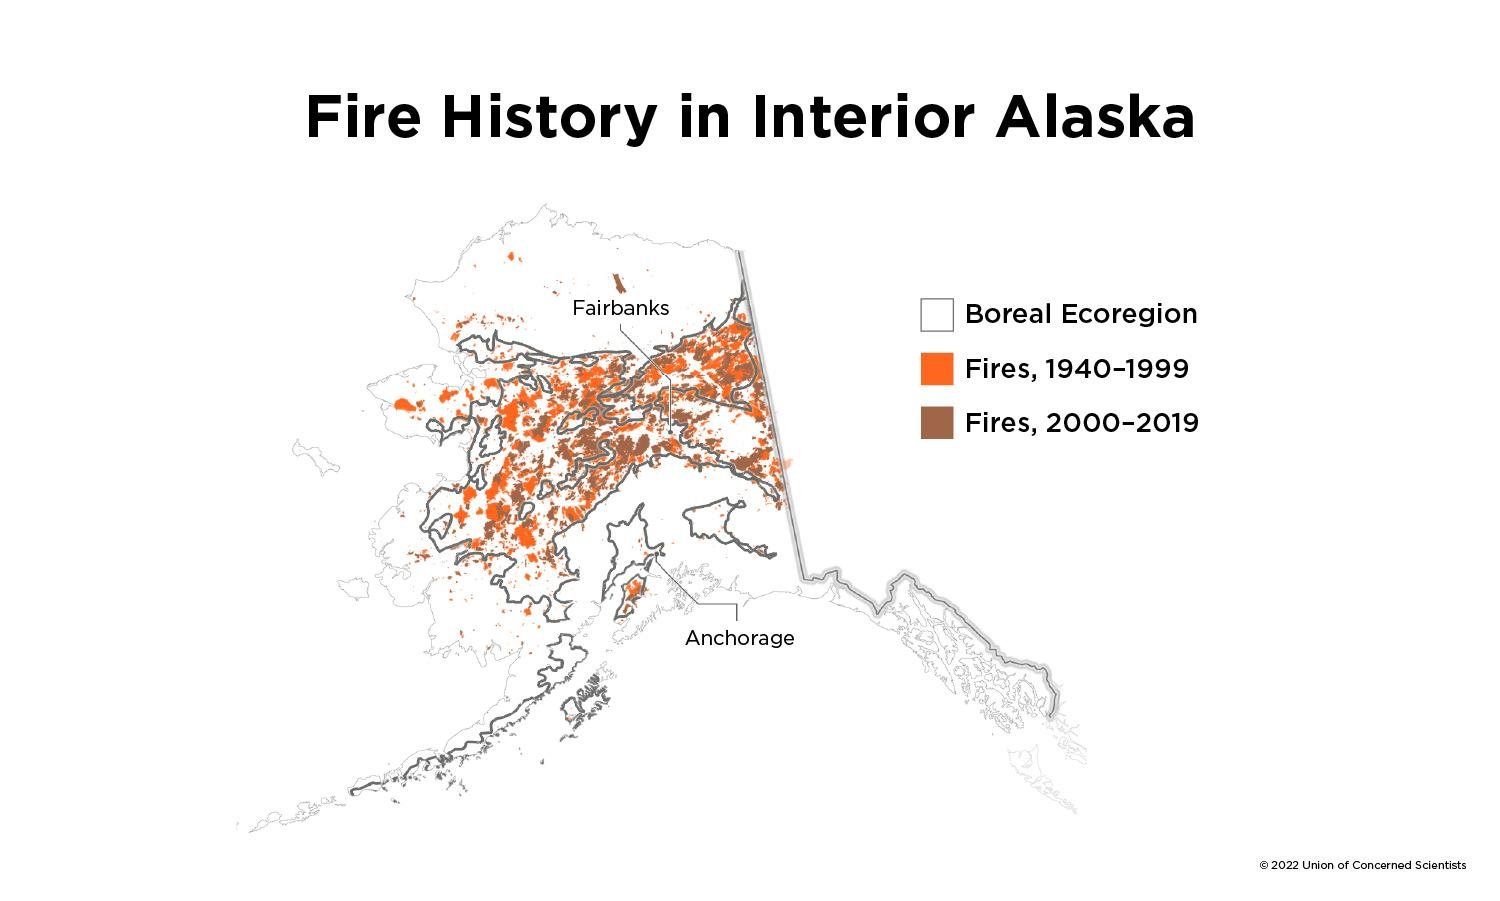 graphic of fire history of Alaska from 1940-2019